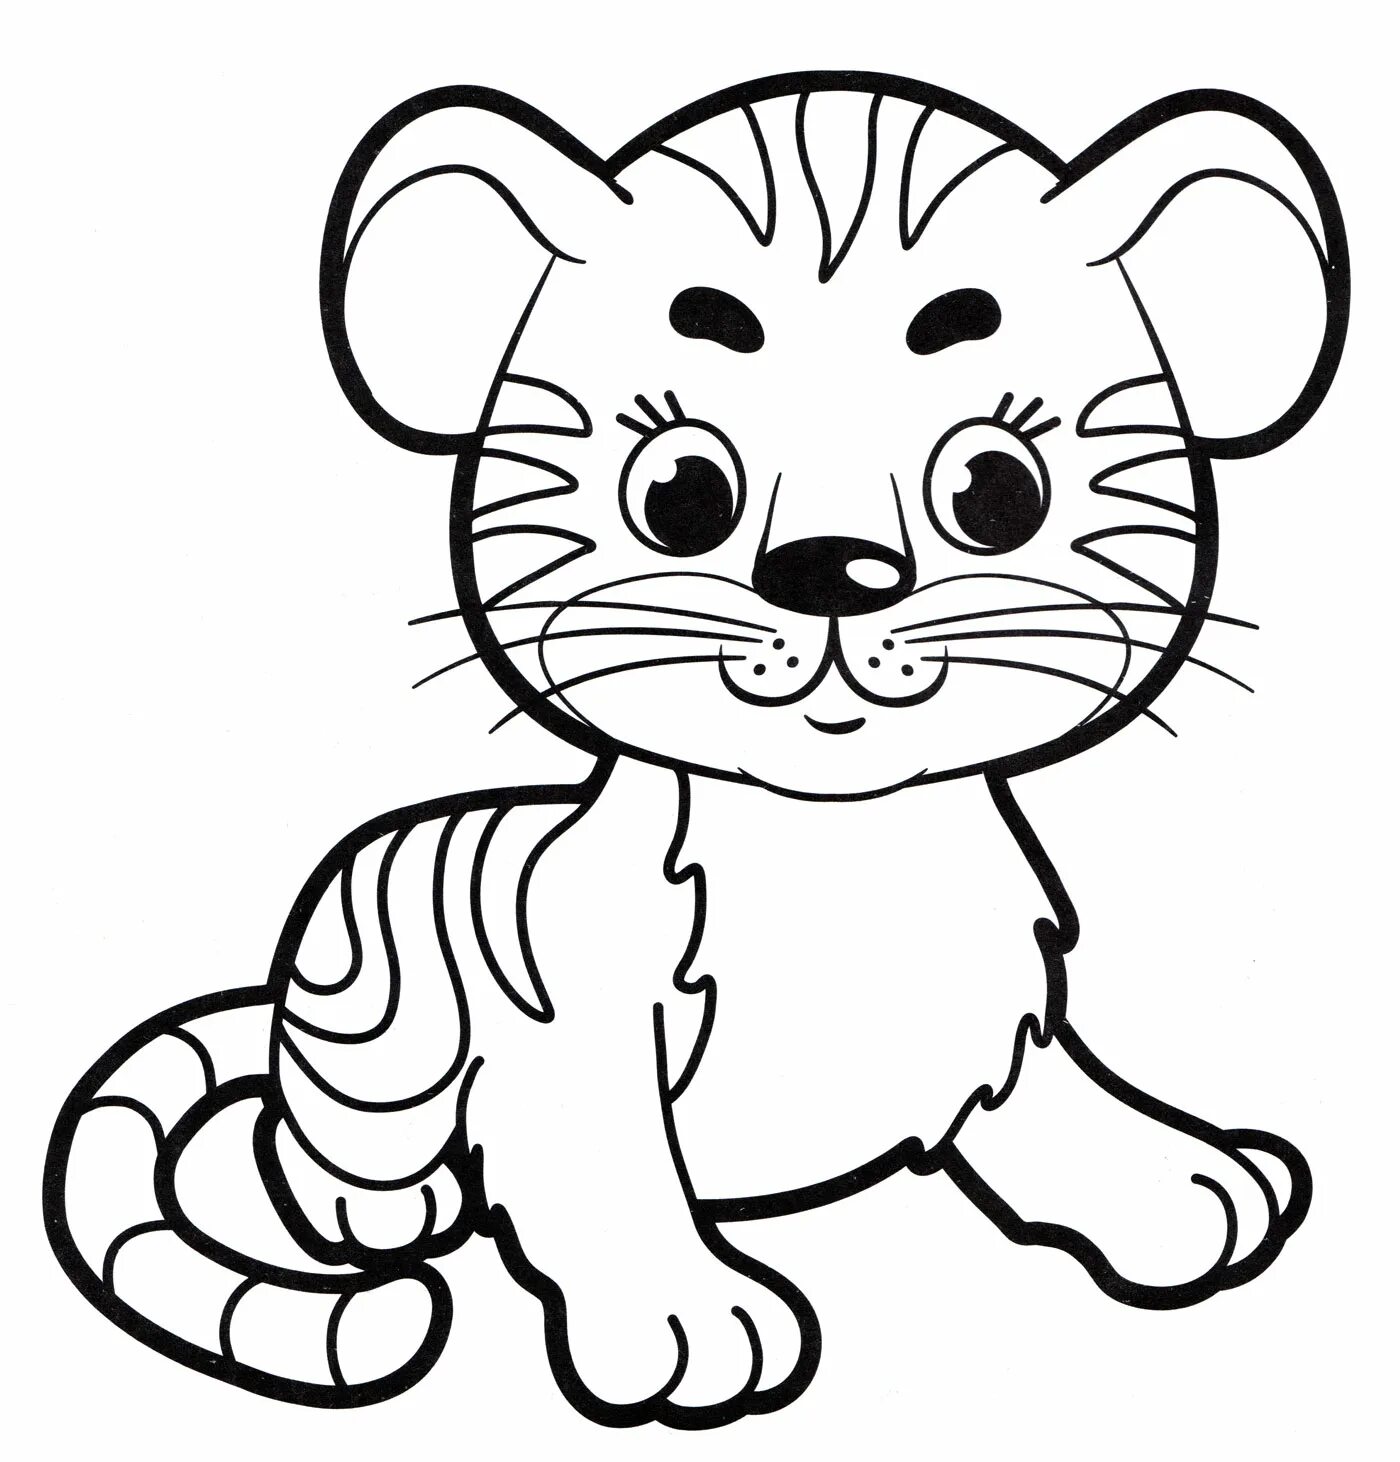 Gorgeous tiger coloring book for 3-4 year olds